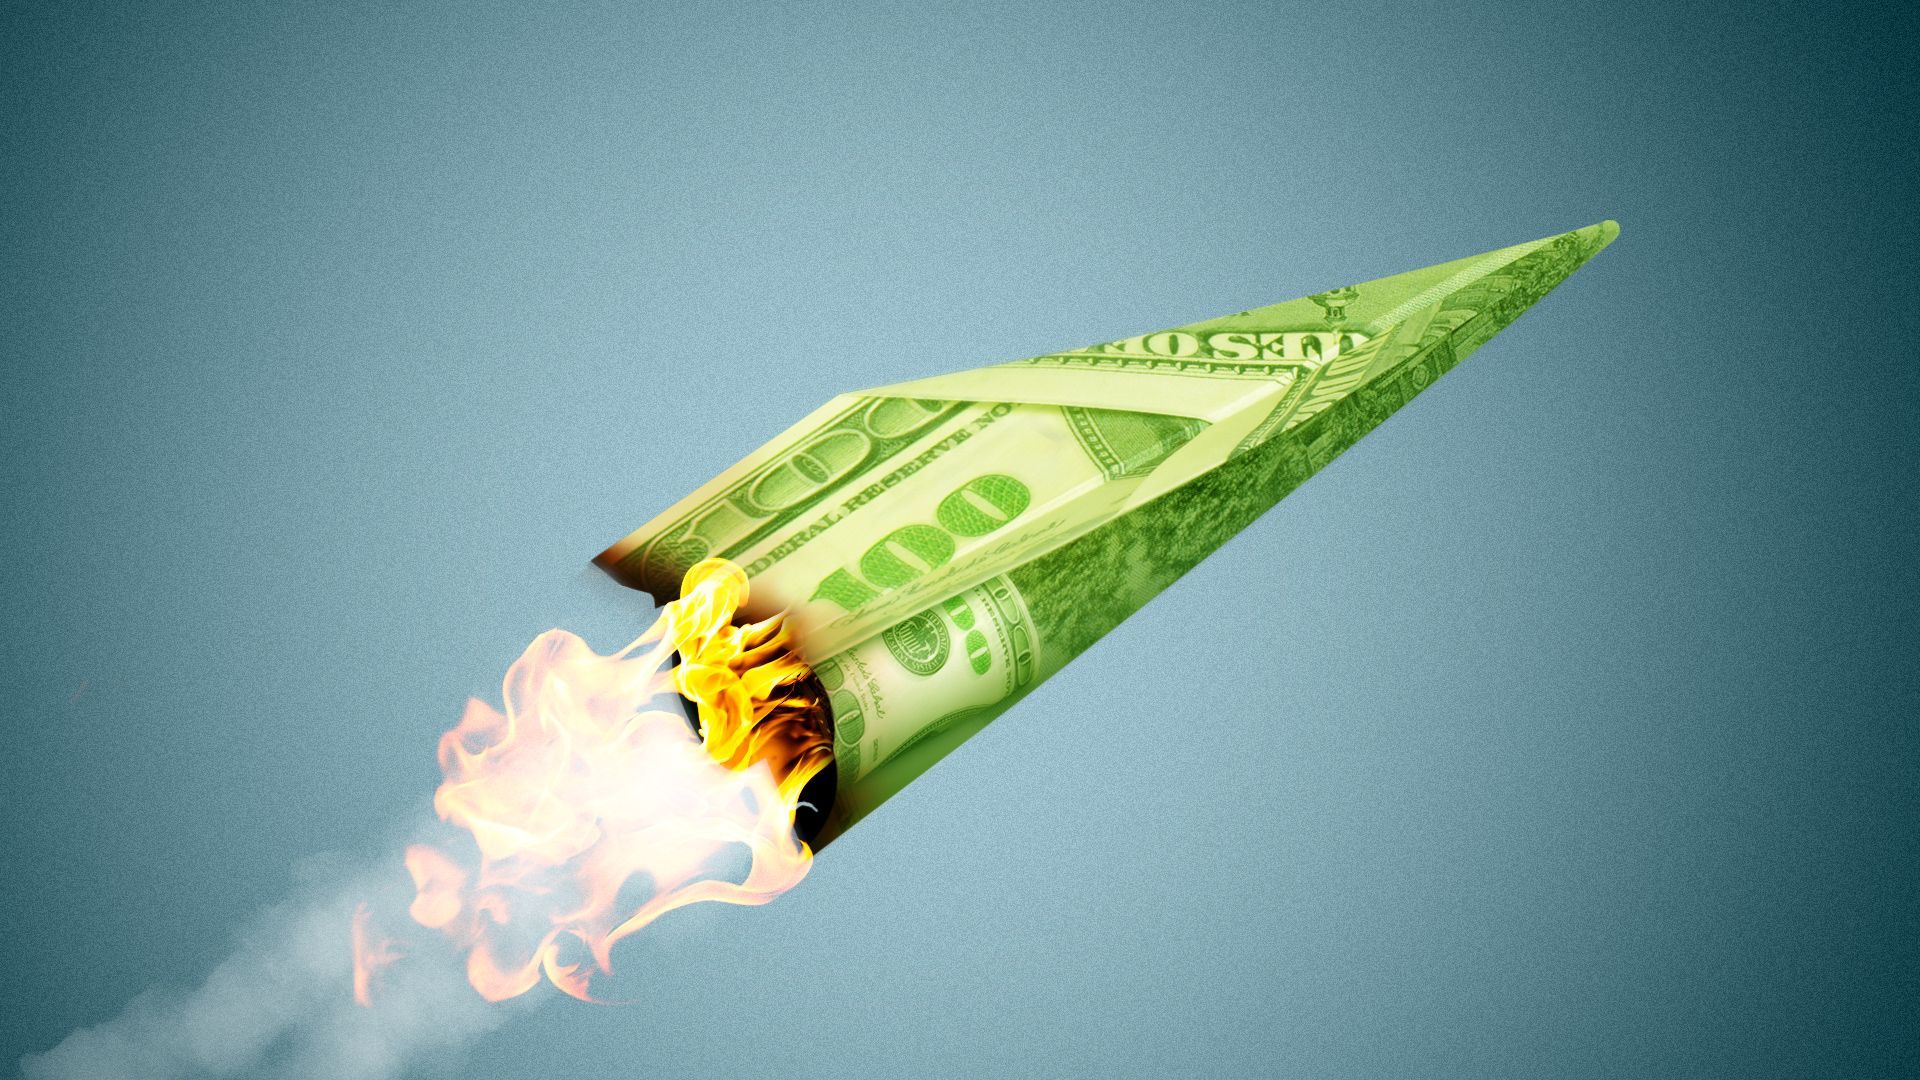 Illustration of a rocket made of money, on fire, shooting into the sky. 